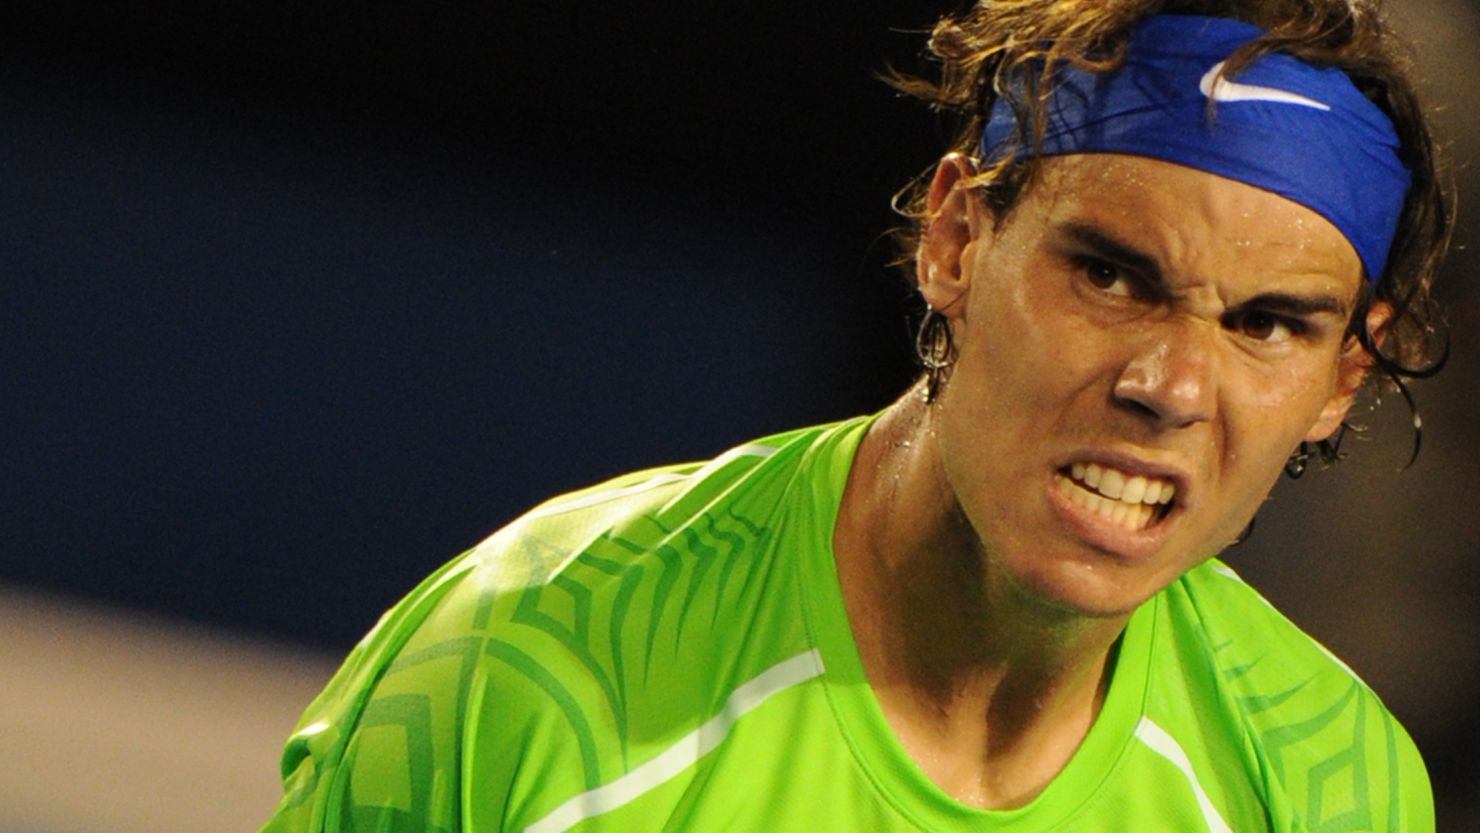 Rafael Nadal has accused media of "a globalized campaign" against Spanish sports stars.